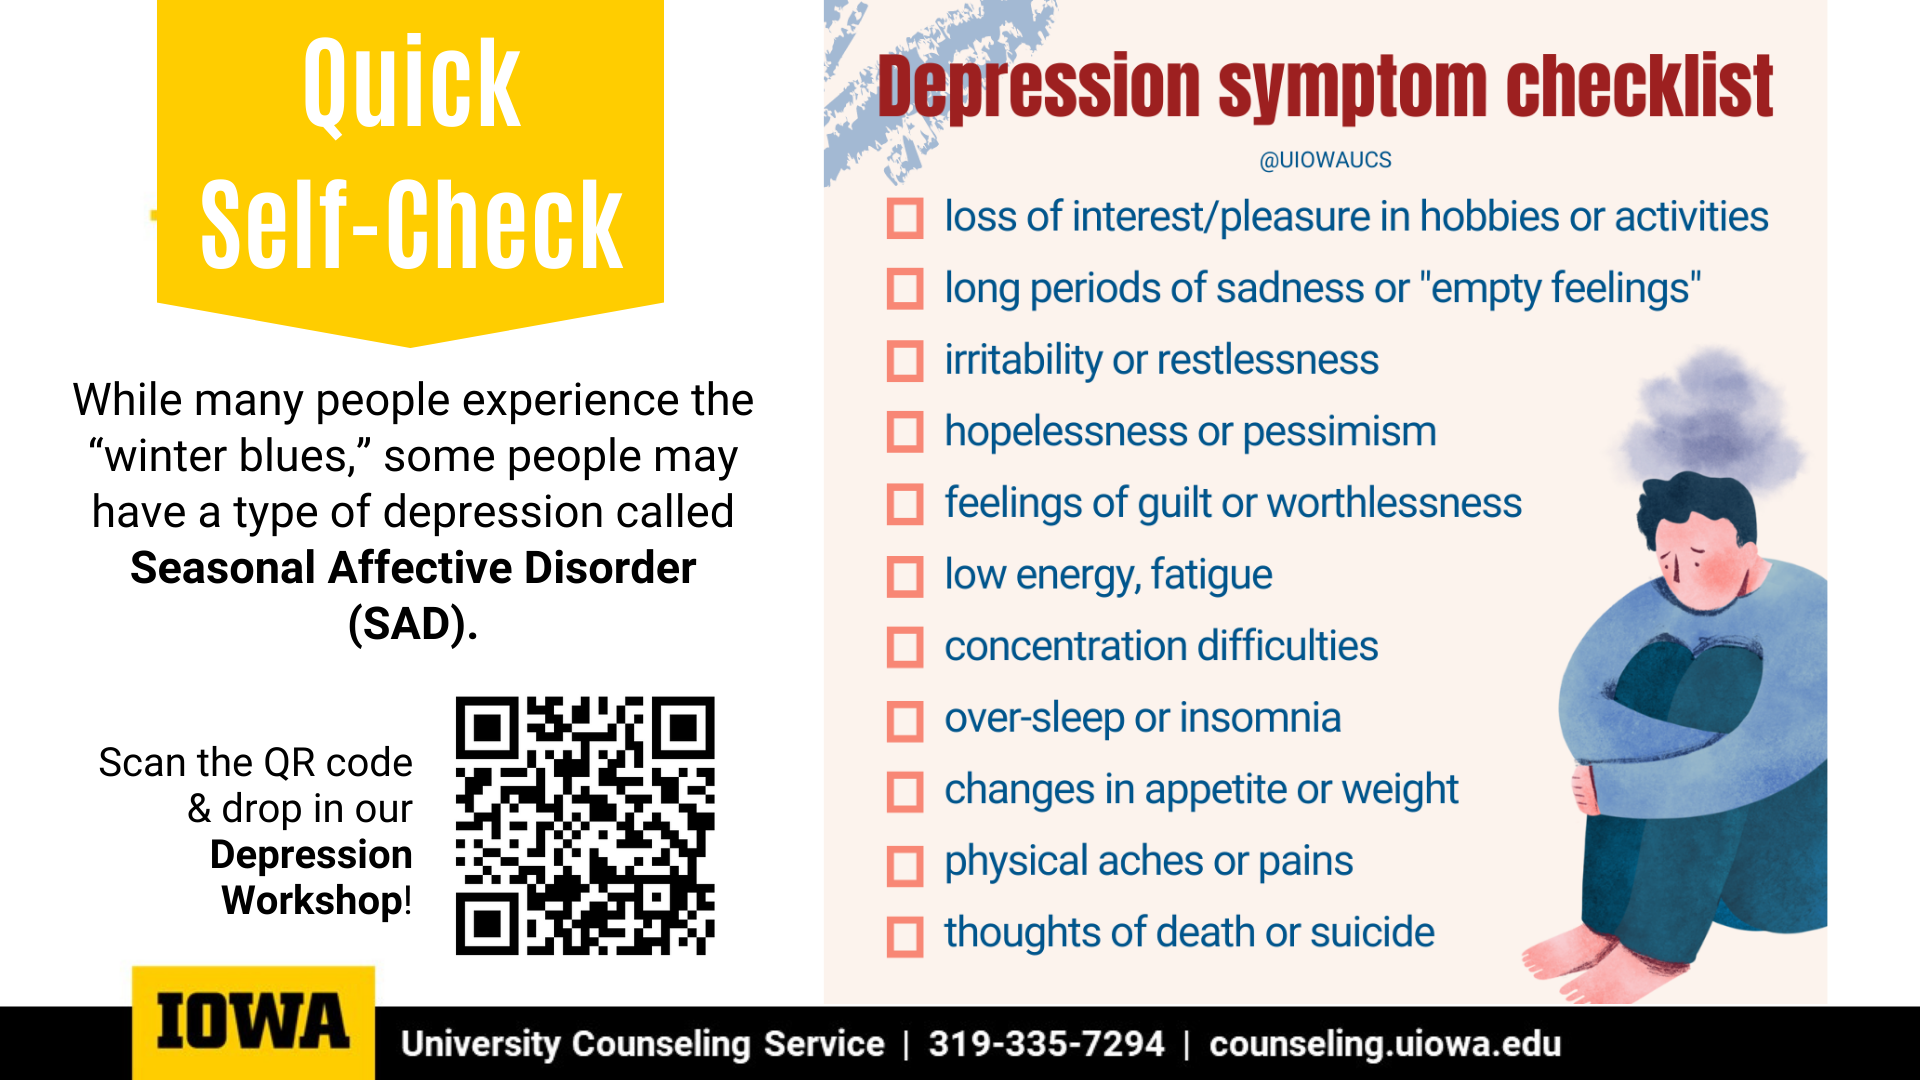 Learn more about the symptoms of depression.